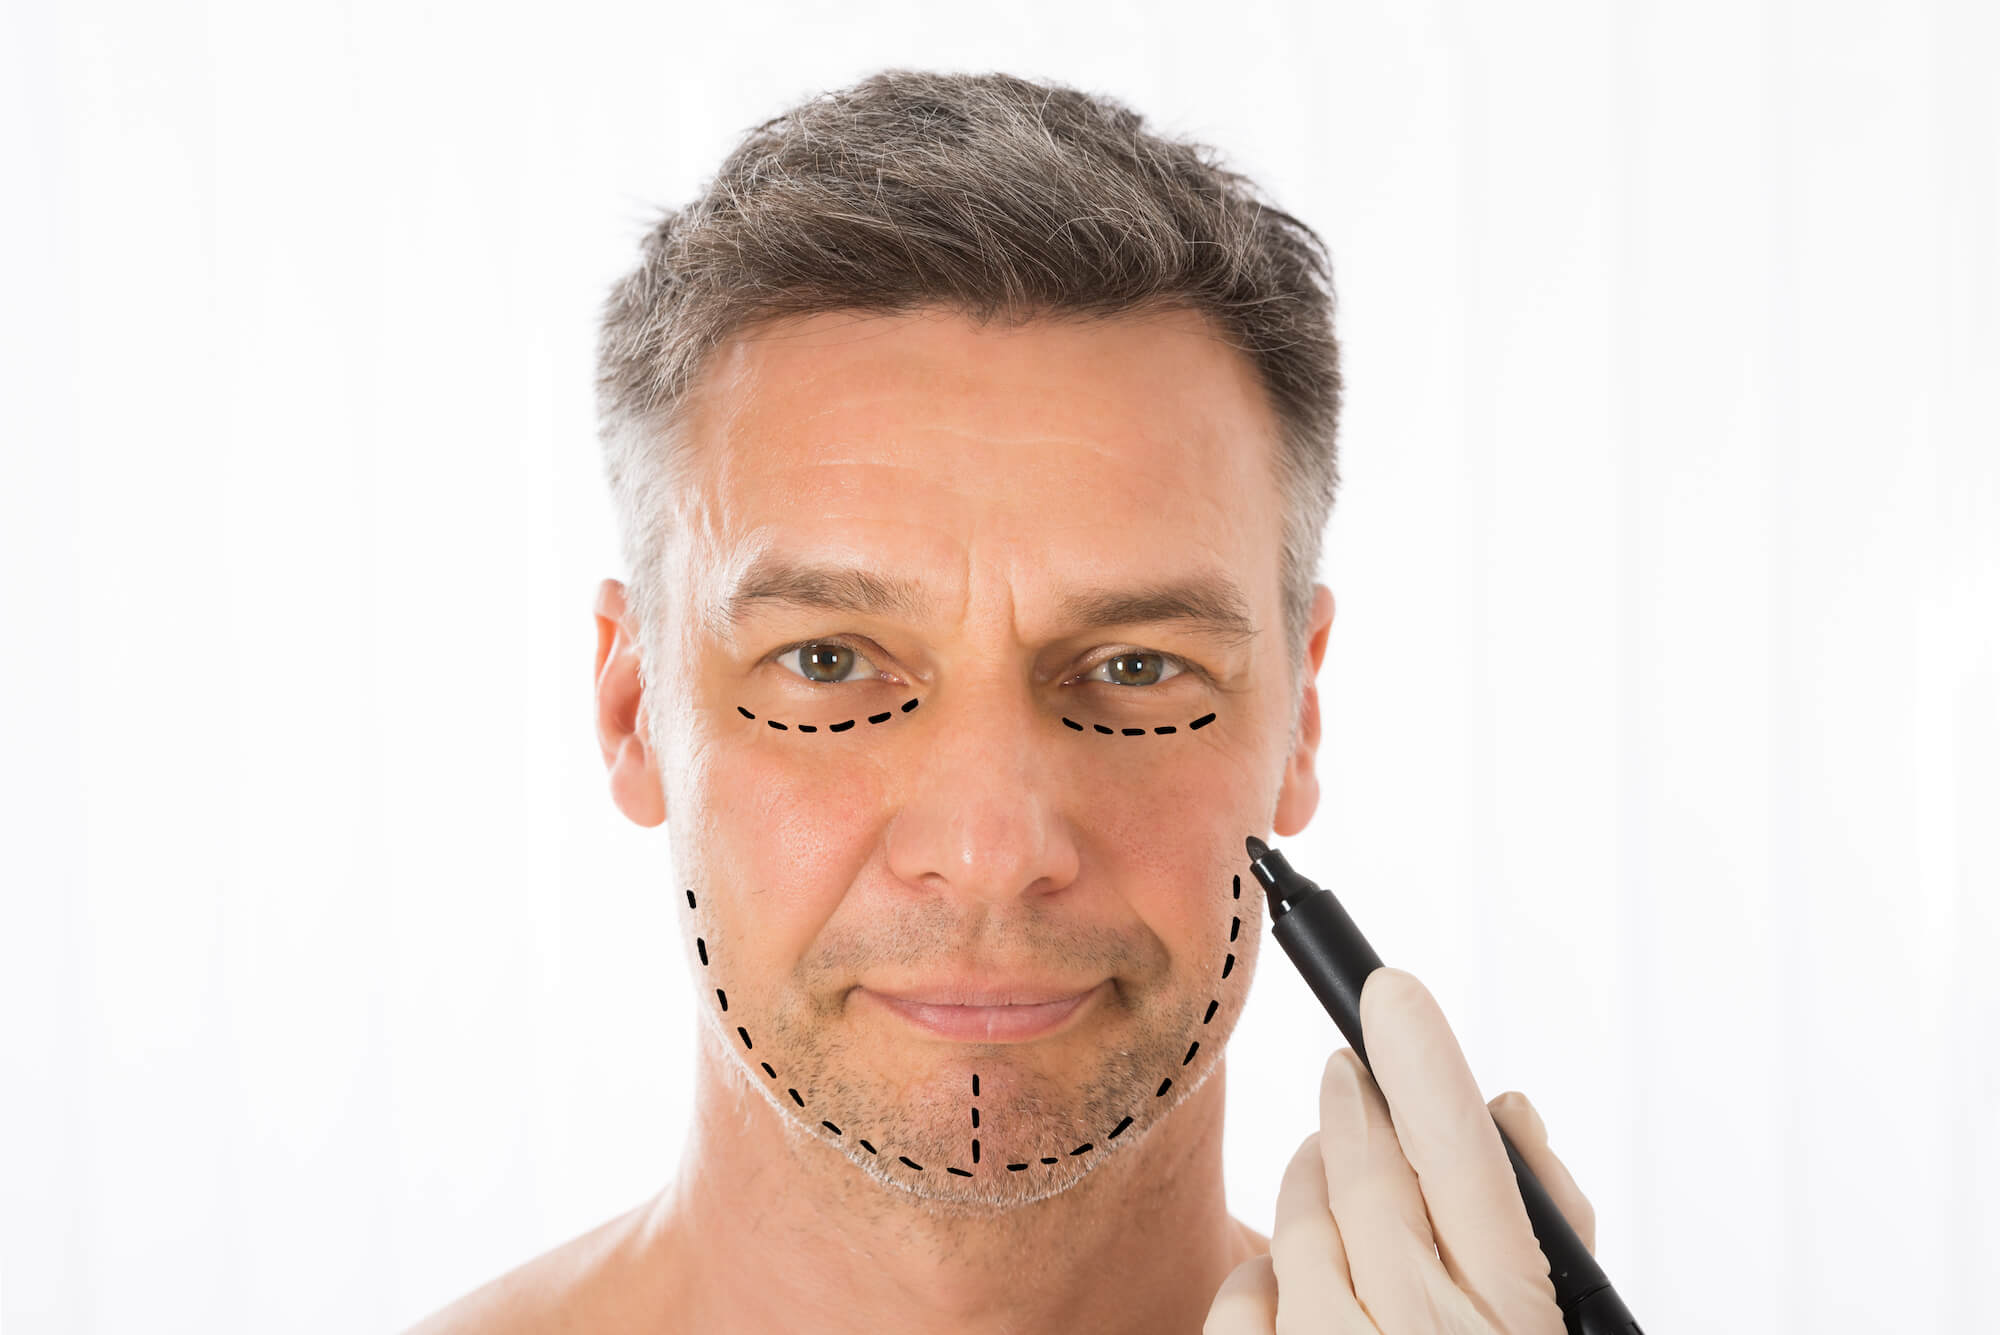 Man's Face With Lines Drawn for Facelift Surgery